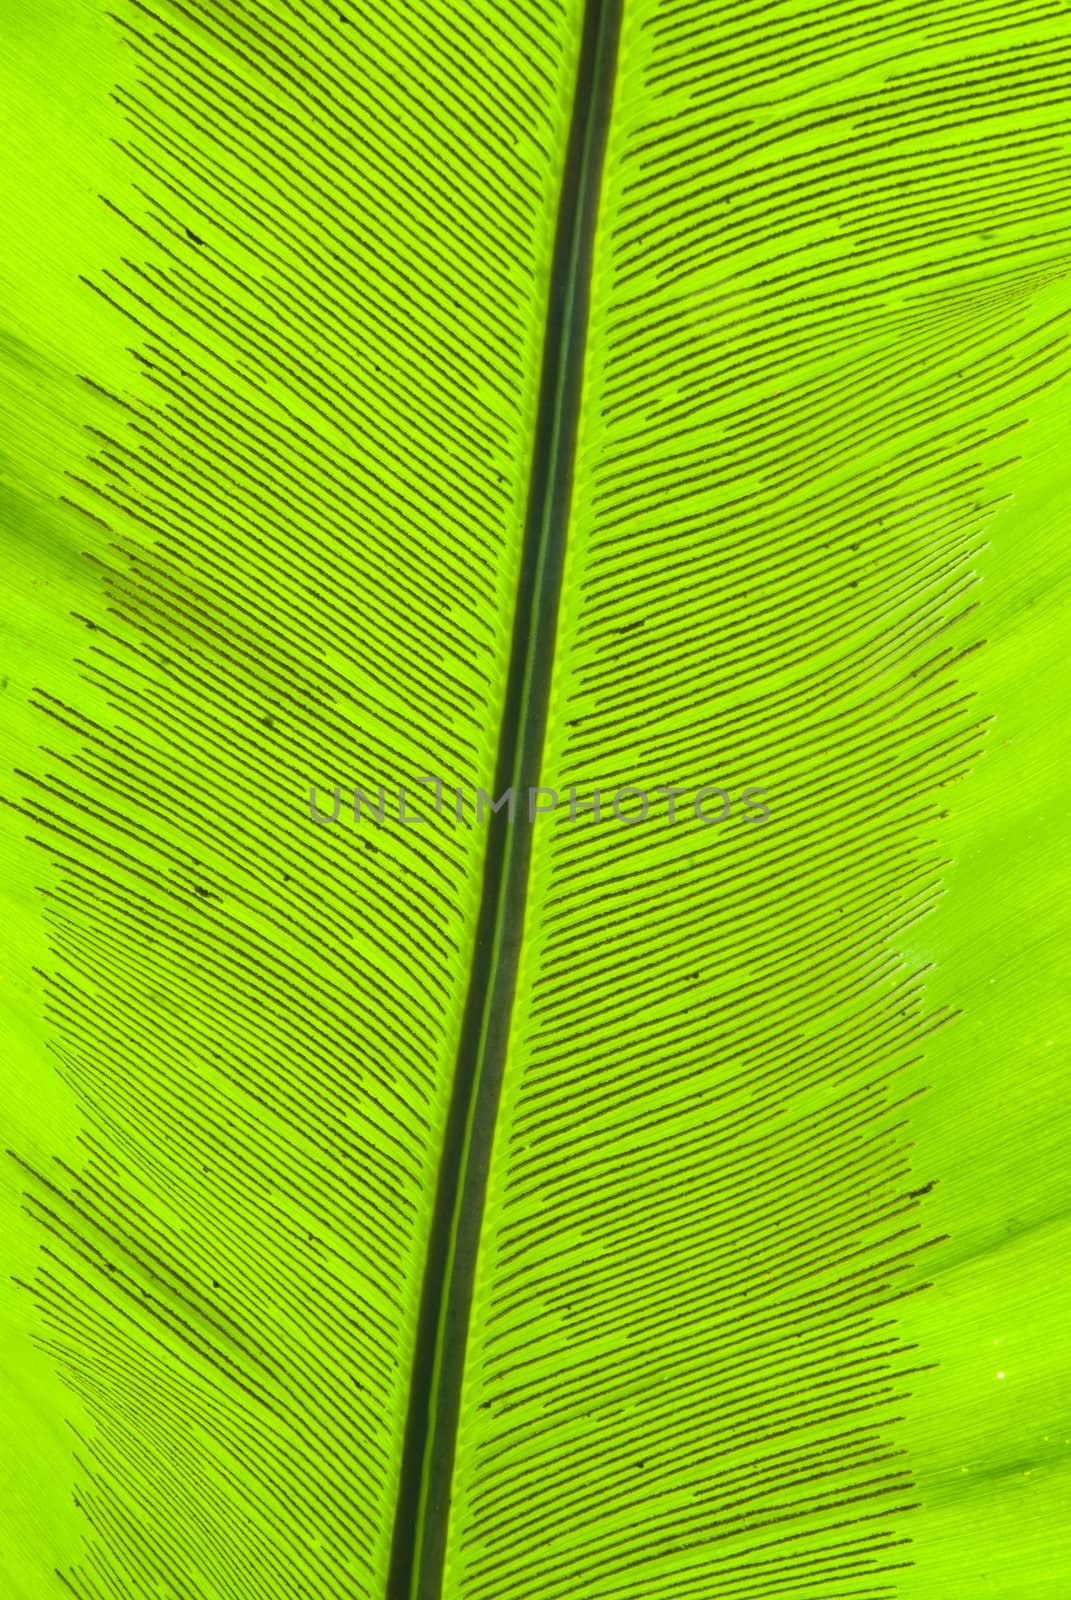 Tropical green leaf - abstract background by mozzyb